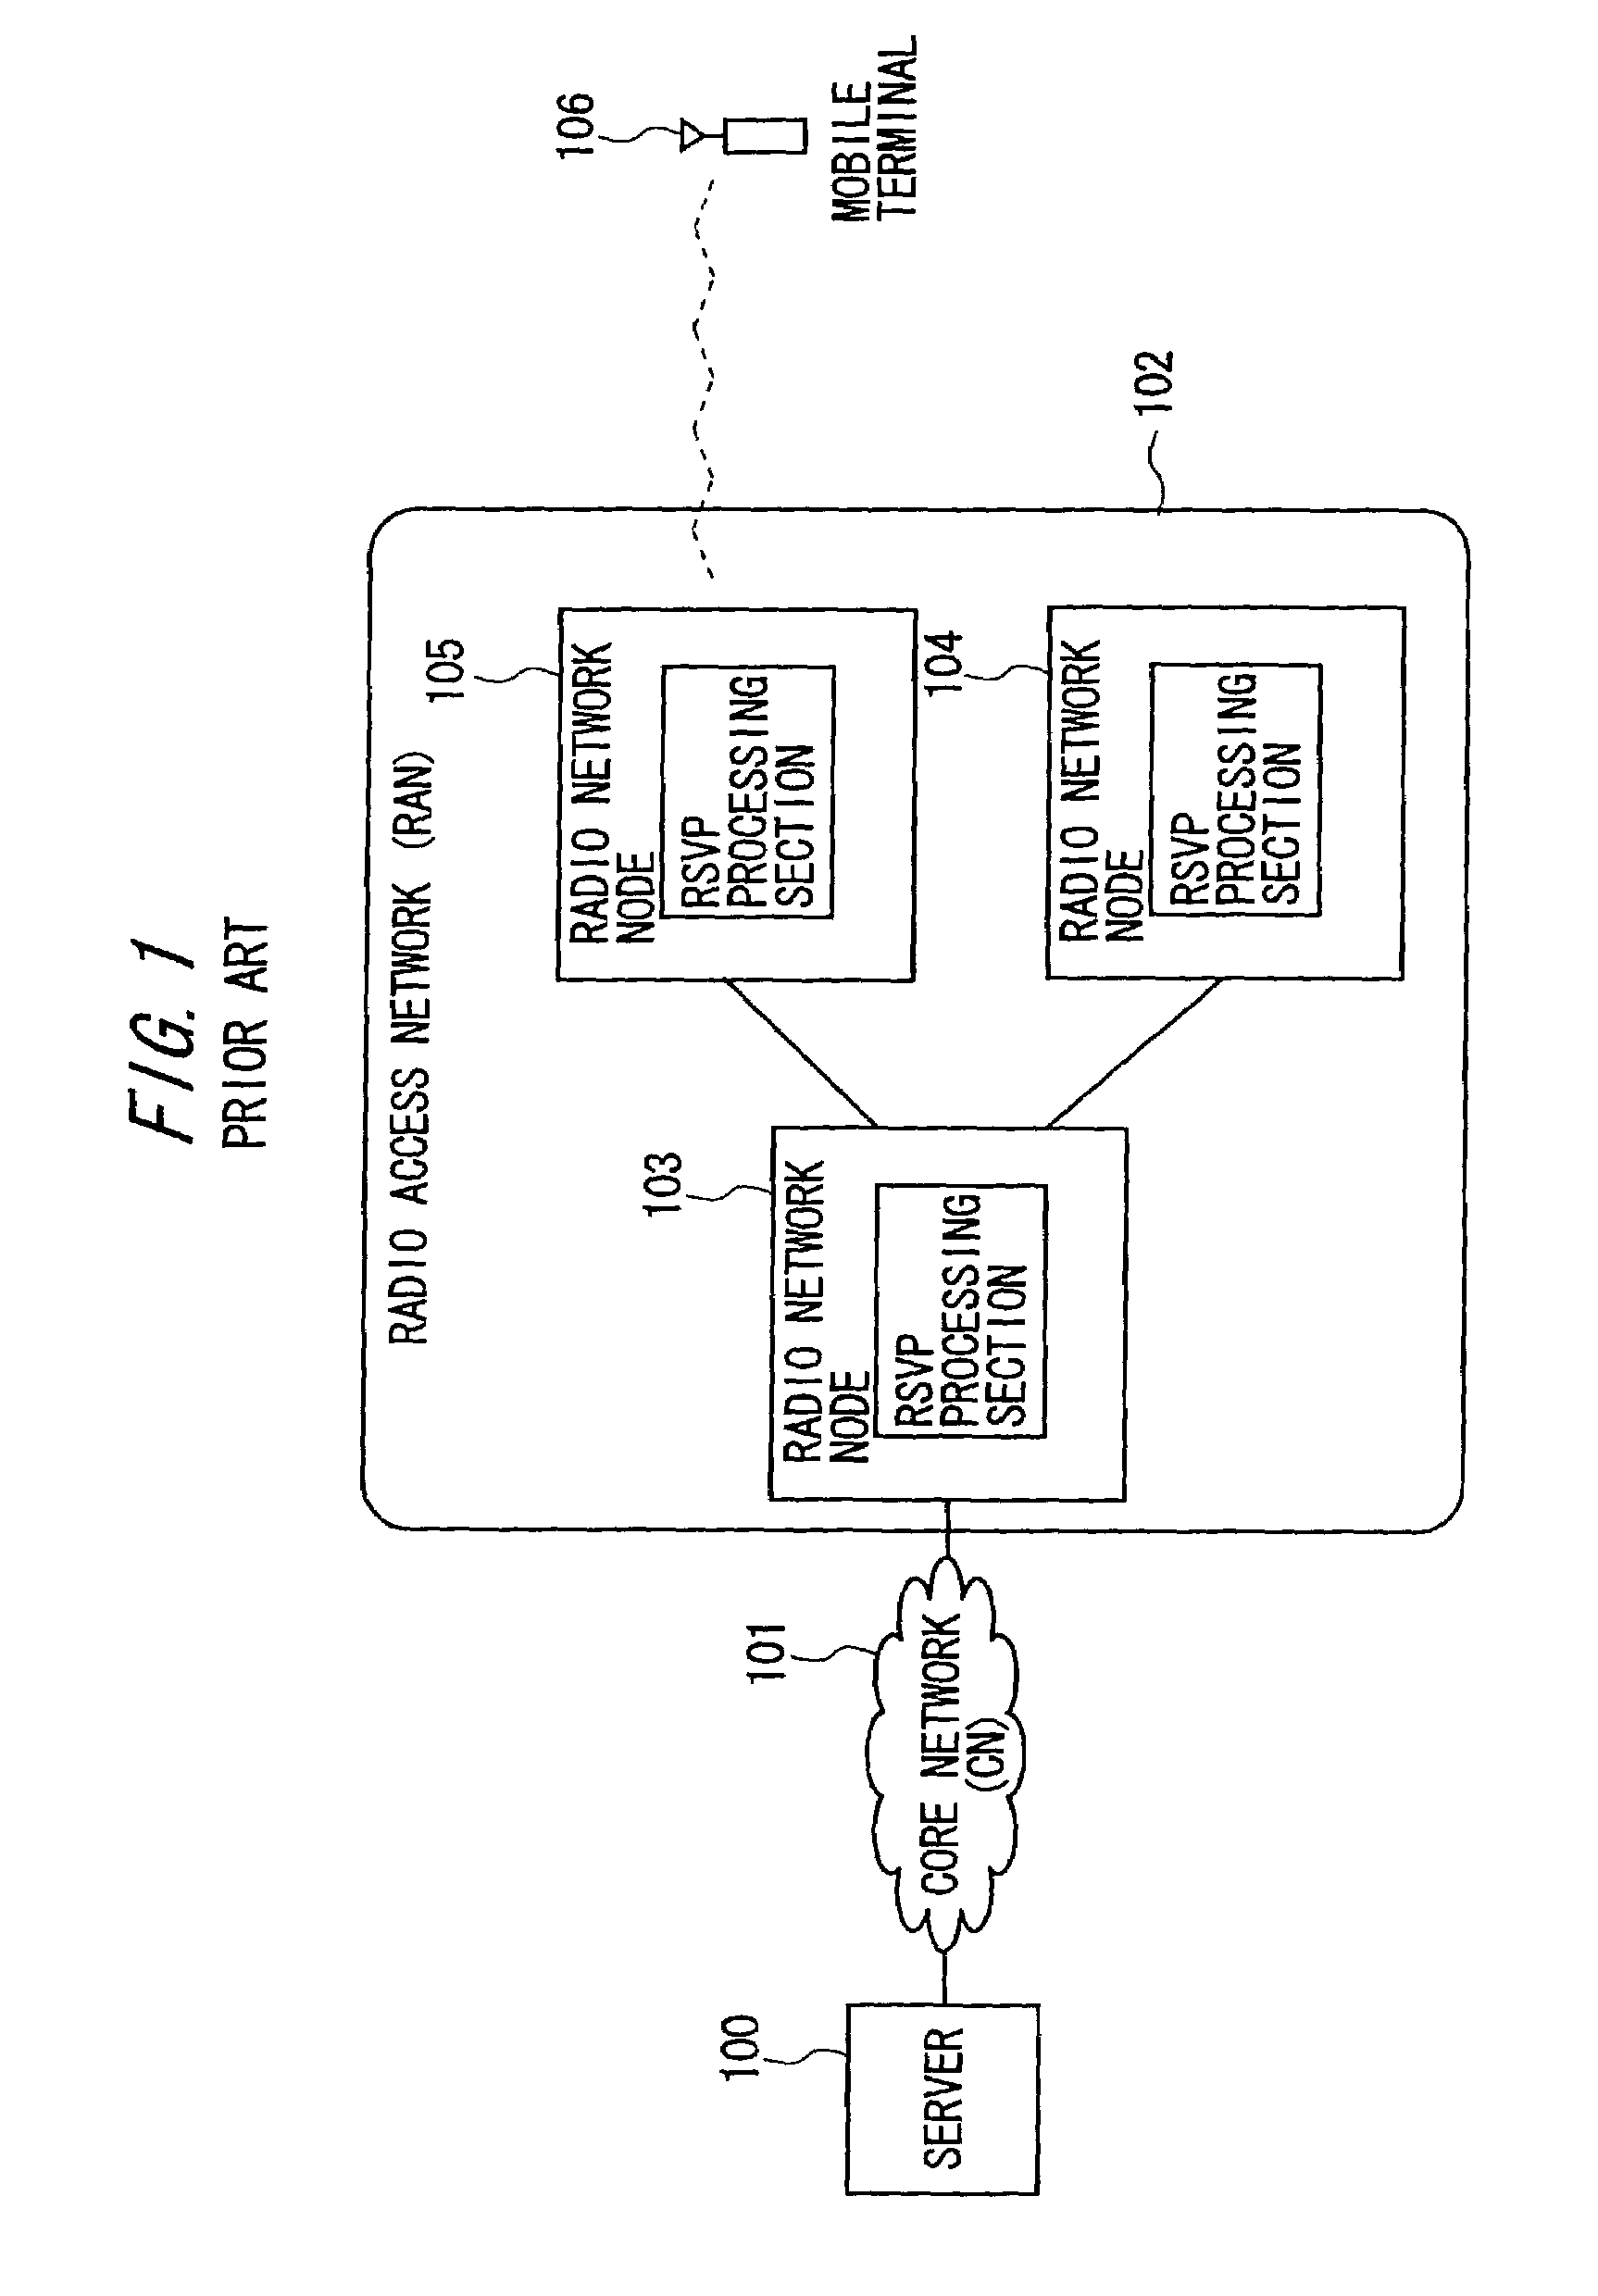 Mobile communication system using resource reservation protocol